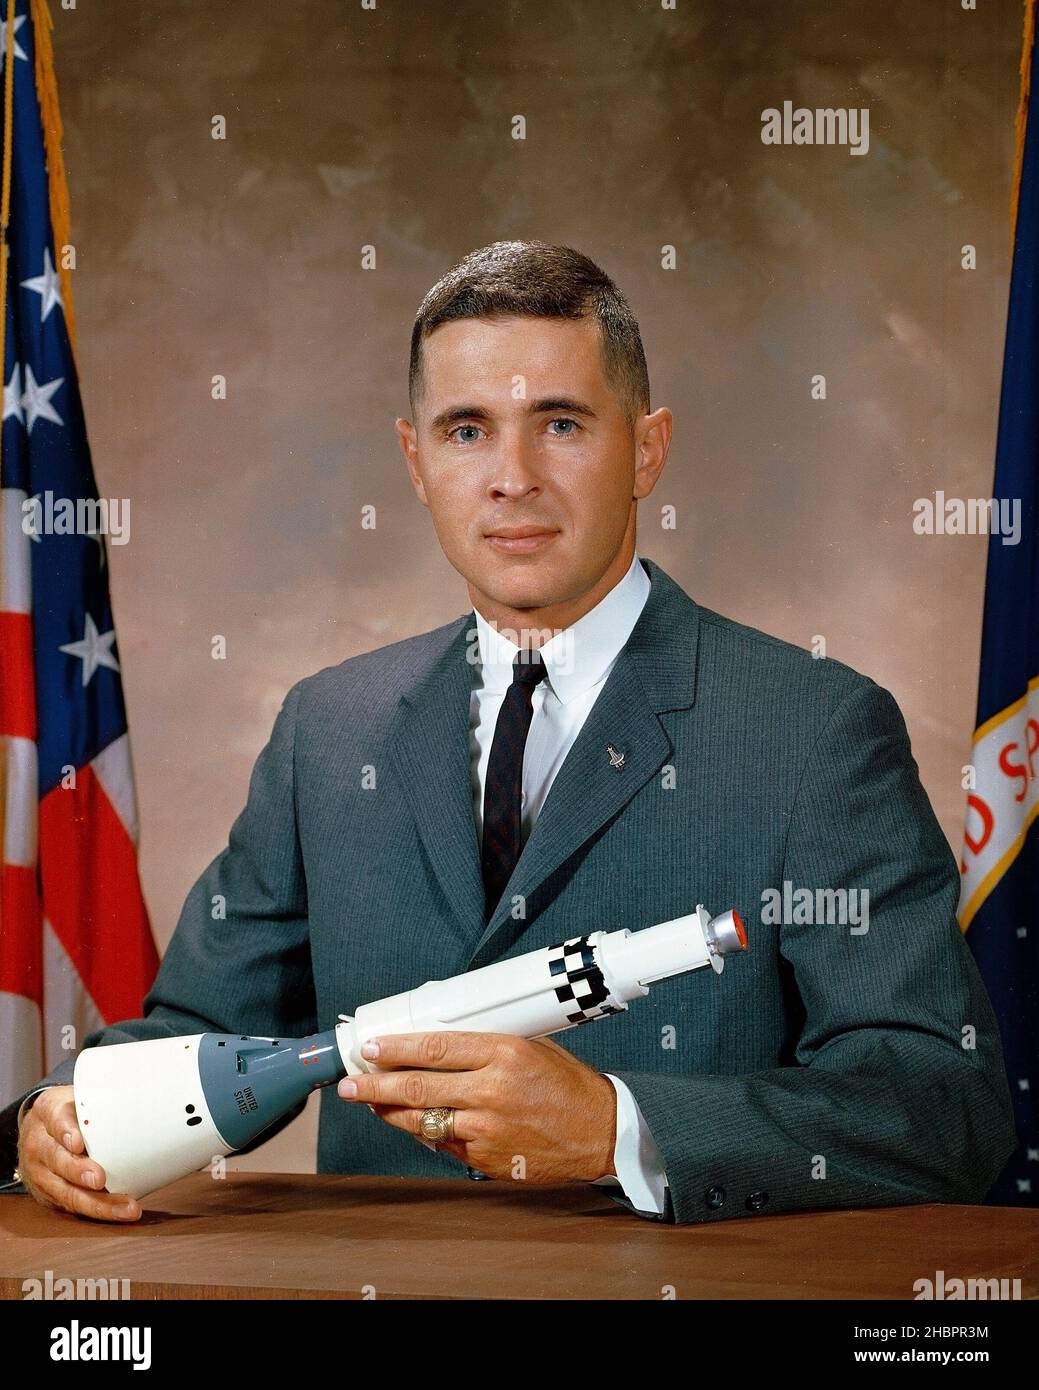 This is the official NASA portrait of astronaut William Anders. Anders was commissioned in the air Force after graduation from the Naval Academy and served as a fighter pilot in all-weather interception squadrons of the Air Defense Command. Later he was responsible for technical management of nuclear power reactor shielding and radiation effects programs while at the Air Force Weapons Laboratory in New Mexico. In 1964, Anders was selected by the National Aeronautics and Space Administration (NASA) as an astronaut with responsibilities for dosimetry, radiation effects and environmental controls Stock Photo